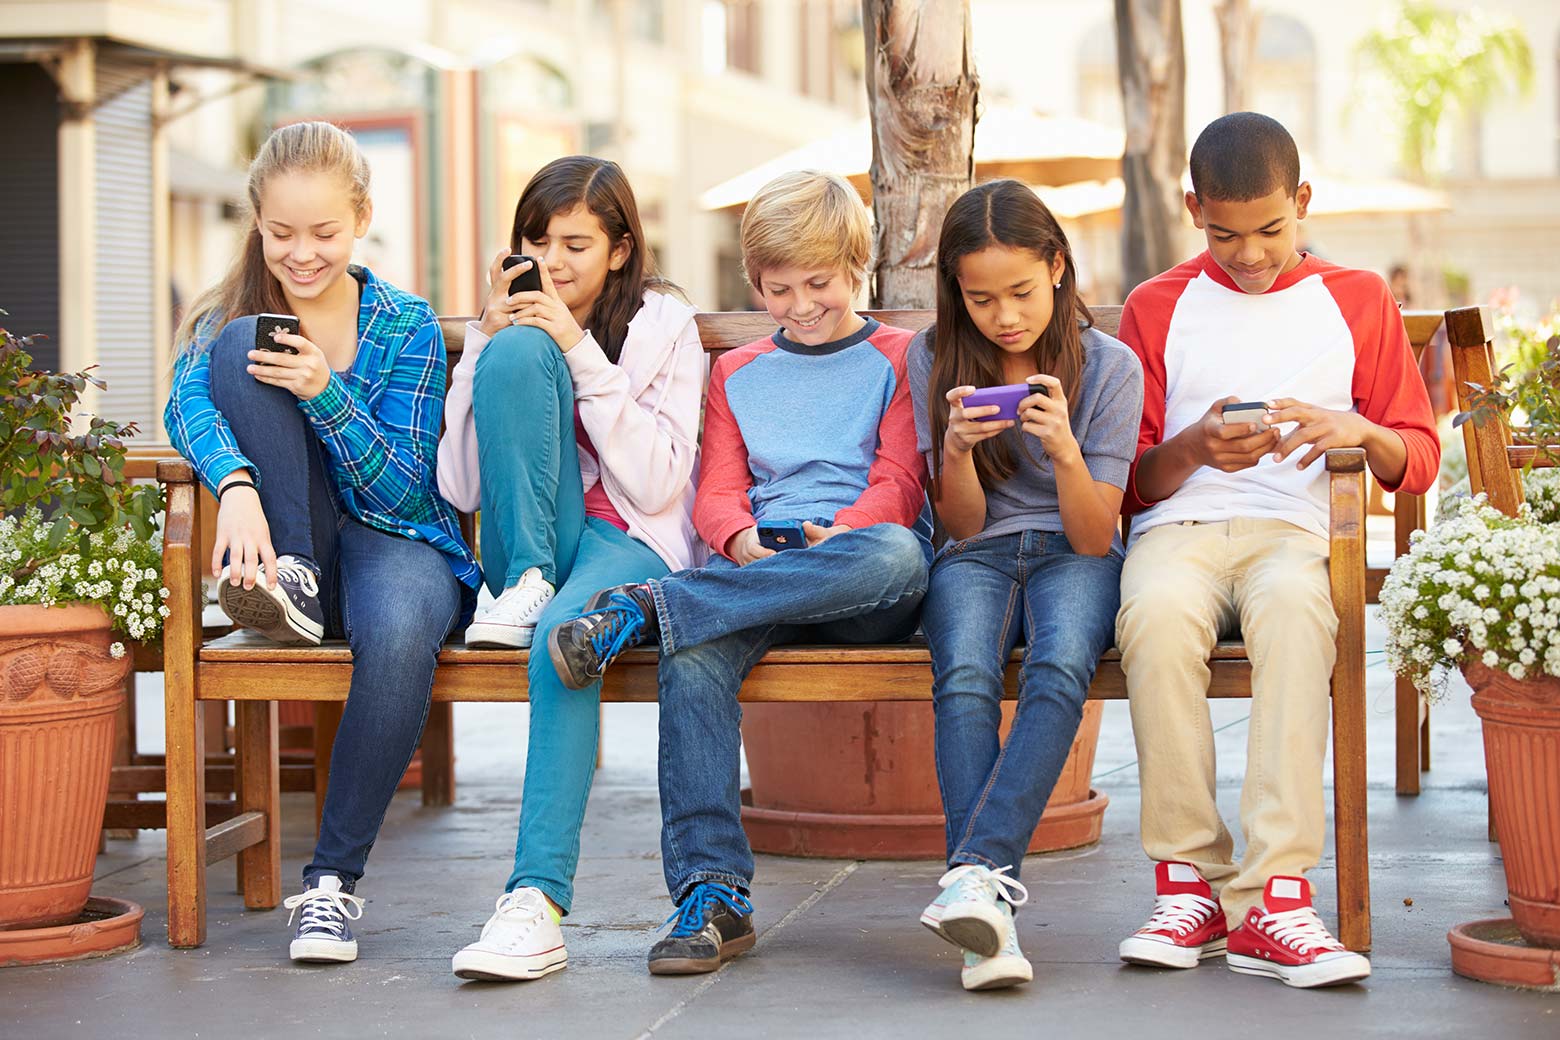 Kids sit on a bench and look at their smartphones.